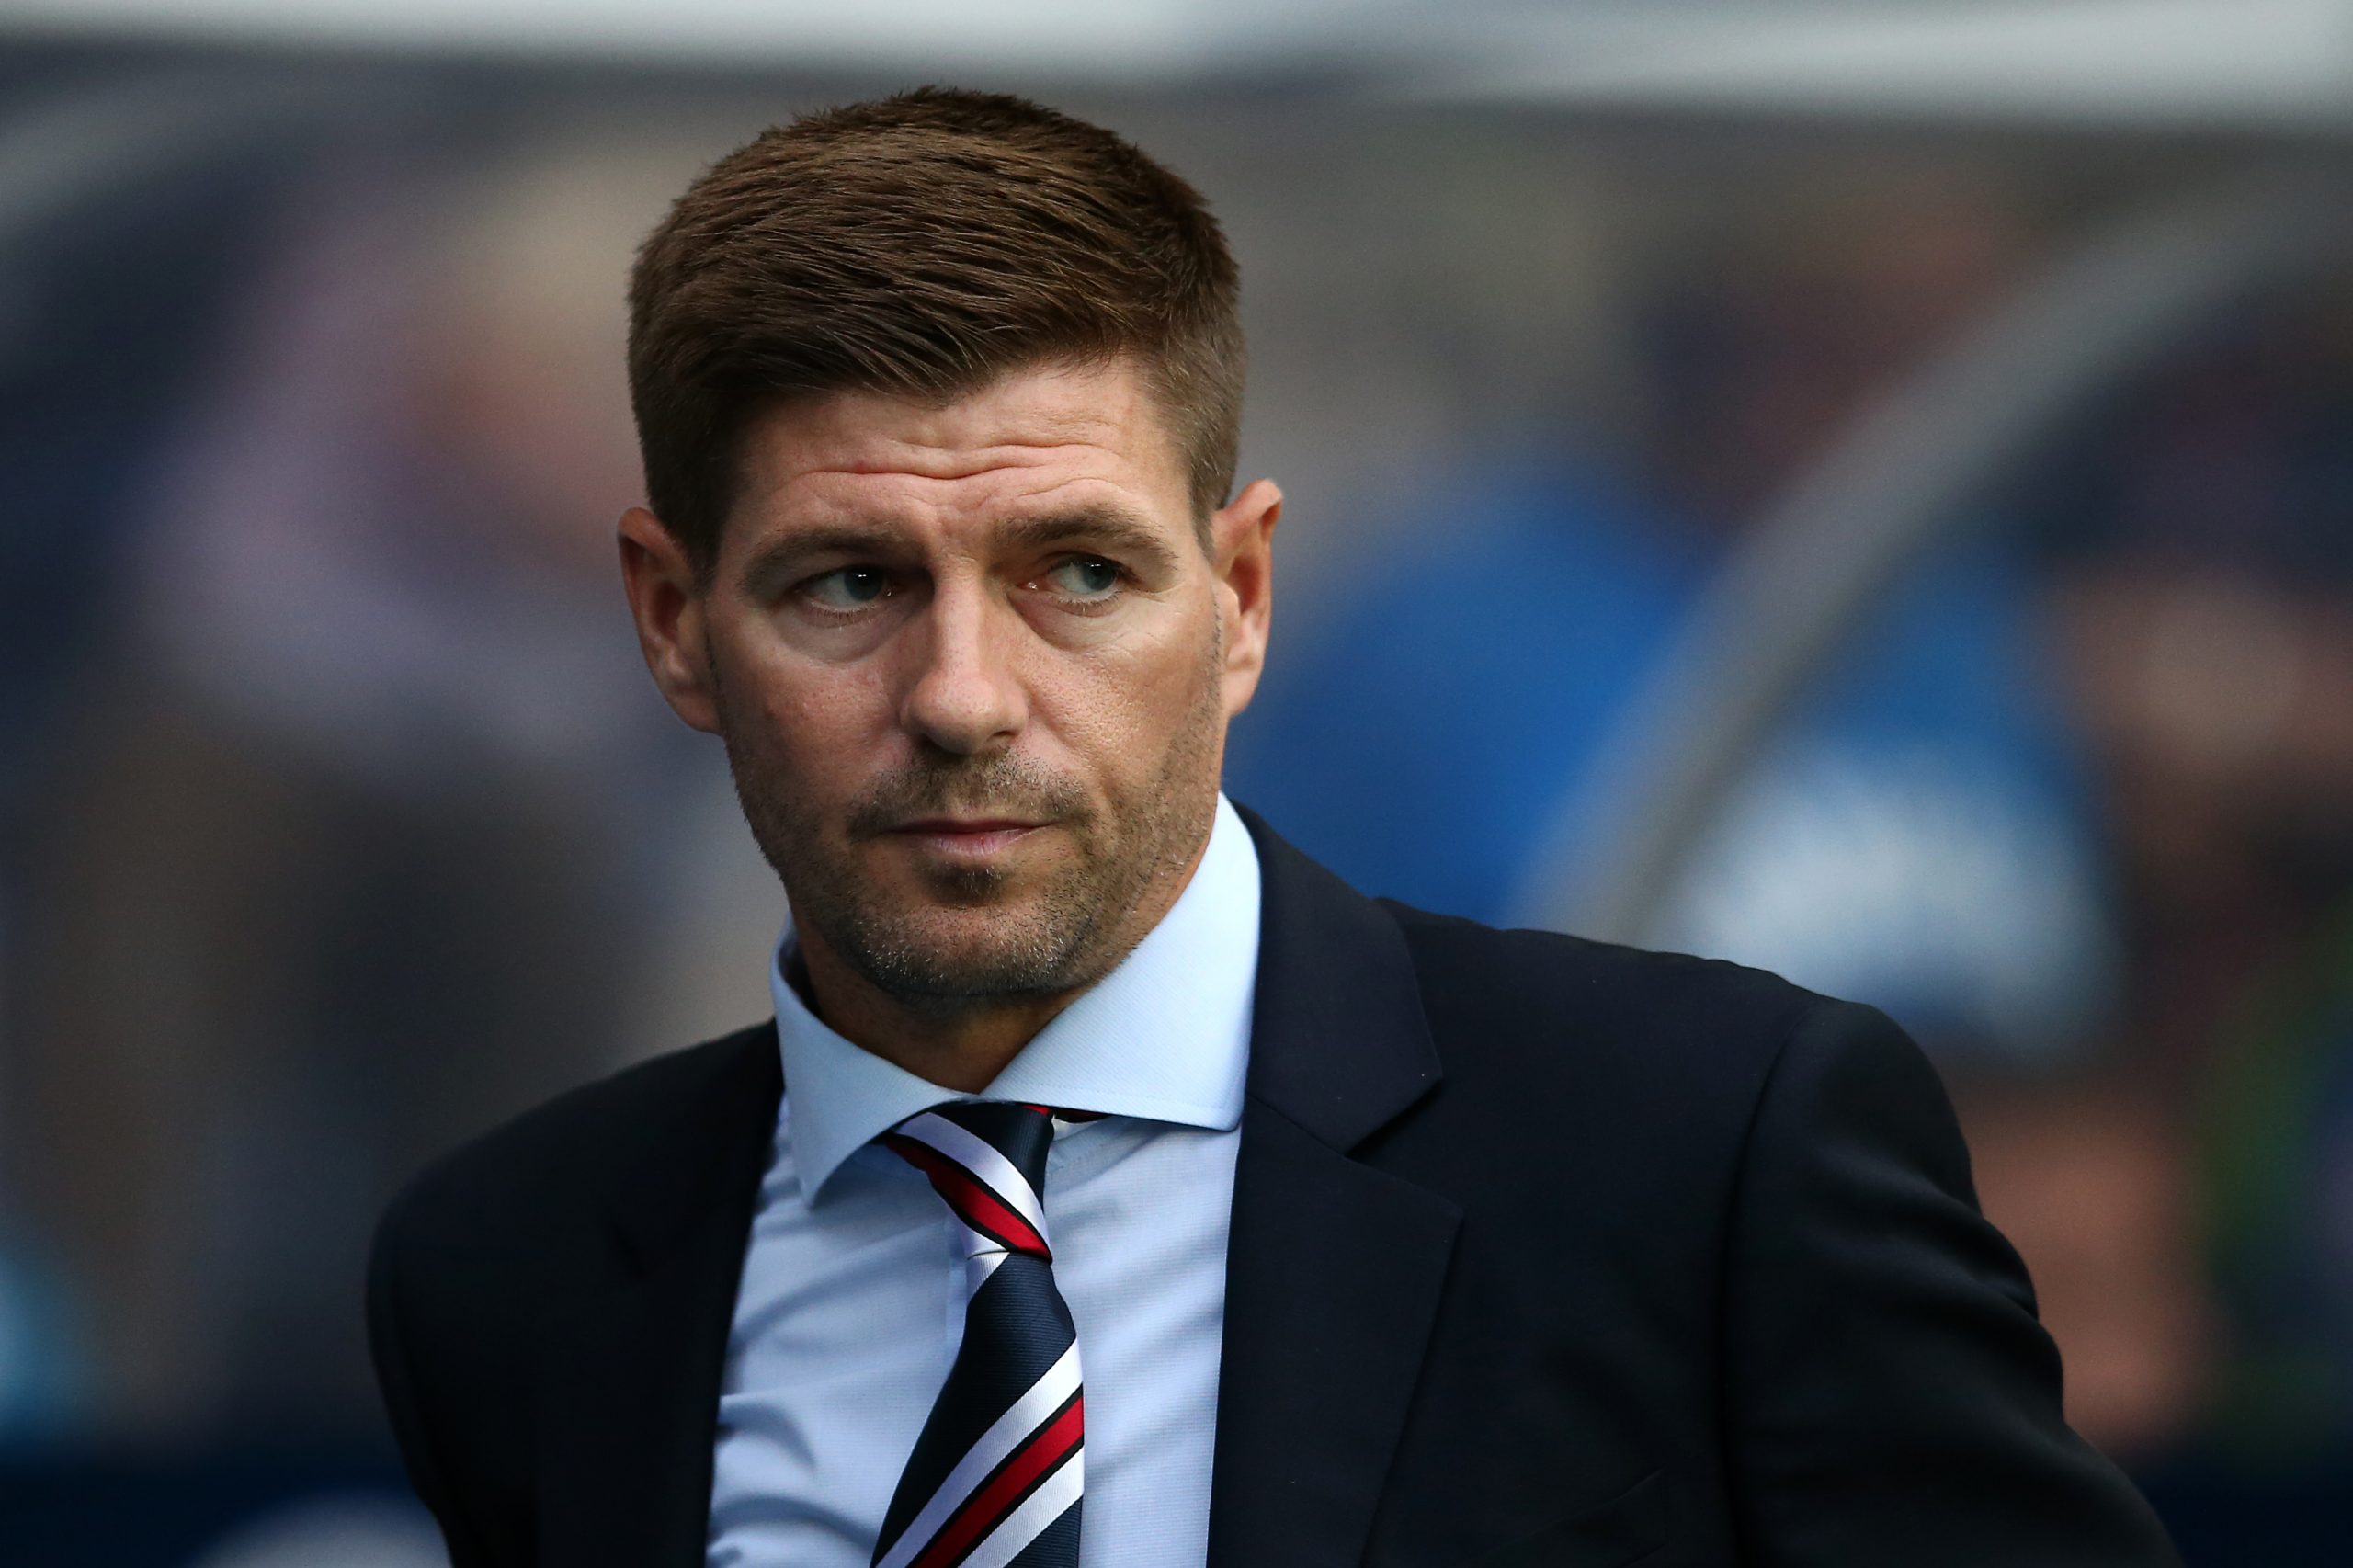 GLASGOW, SCOTLAND - JULY 12: Steven Gerrard manager of Rangers looks on during the UEFA Europa League Qualifying Round match between Rangers and Shkupi at Ibrox Stadium on July 12, 2018 in Glasgow, Scotland.